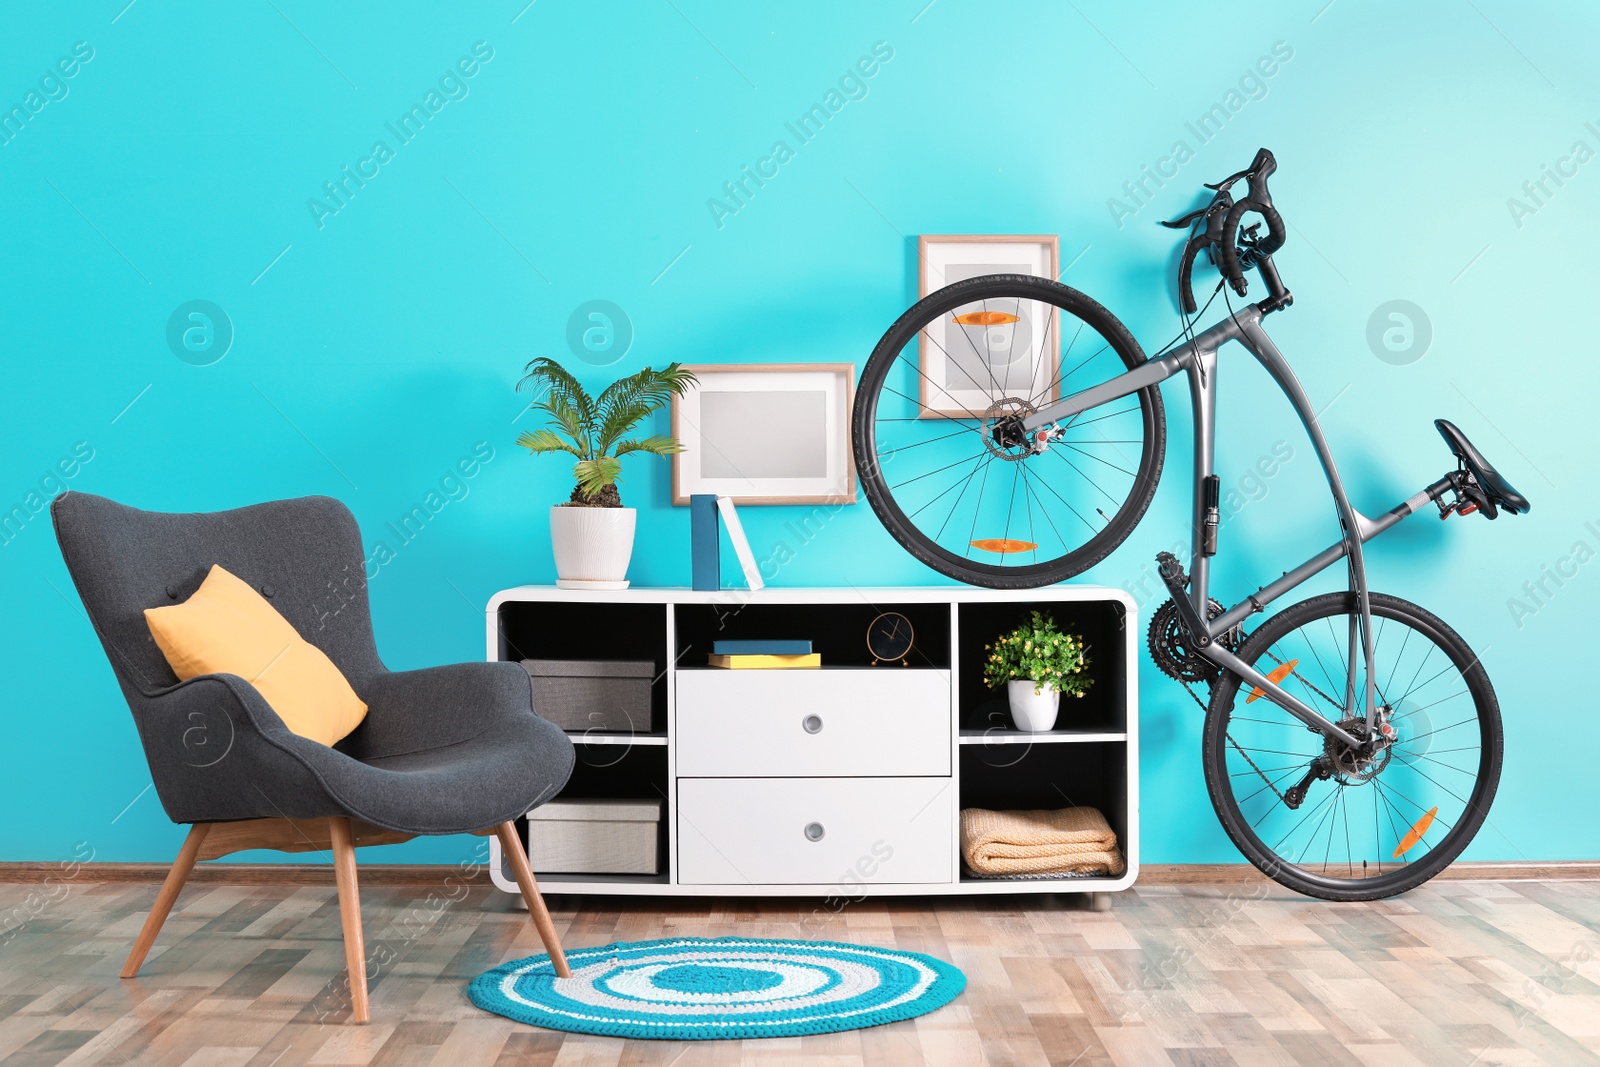 Photo of Stylish room interior with bicycle and armchair